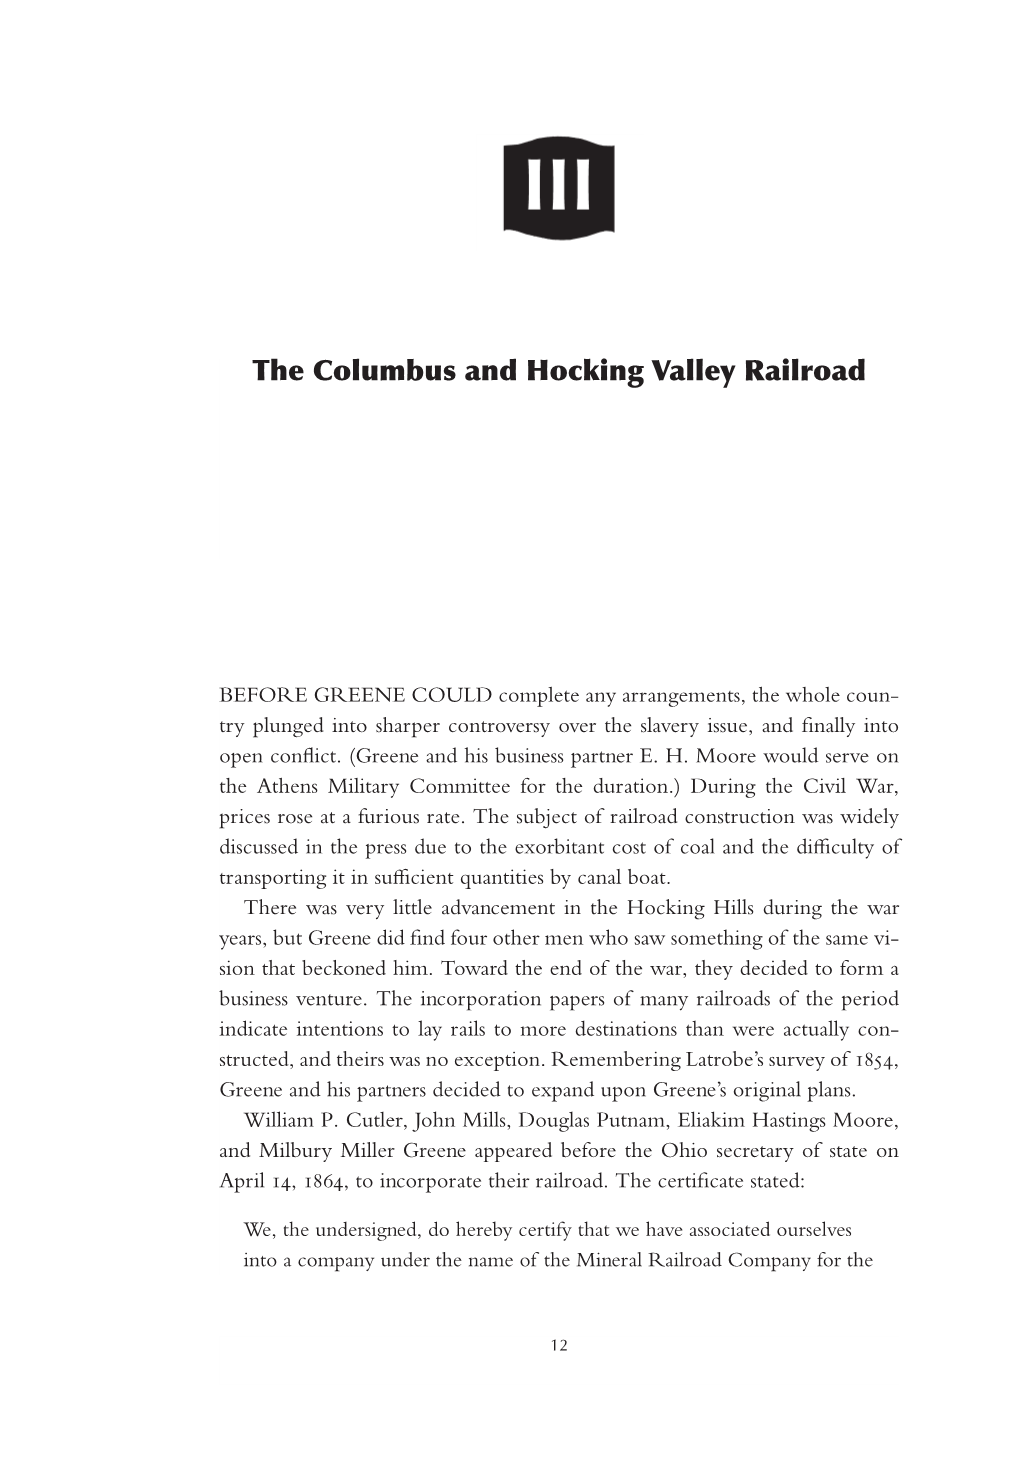 The Columbus and Hocking Valley Railroad